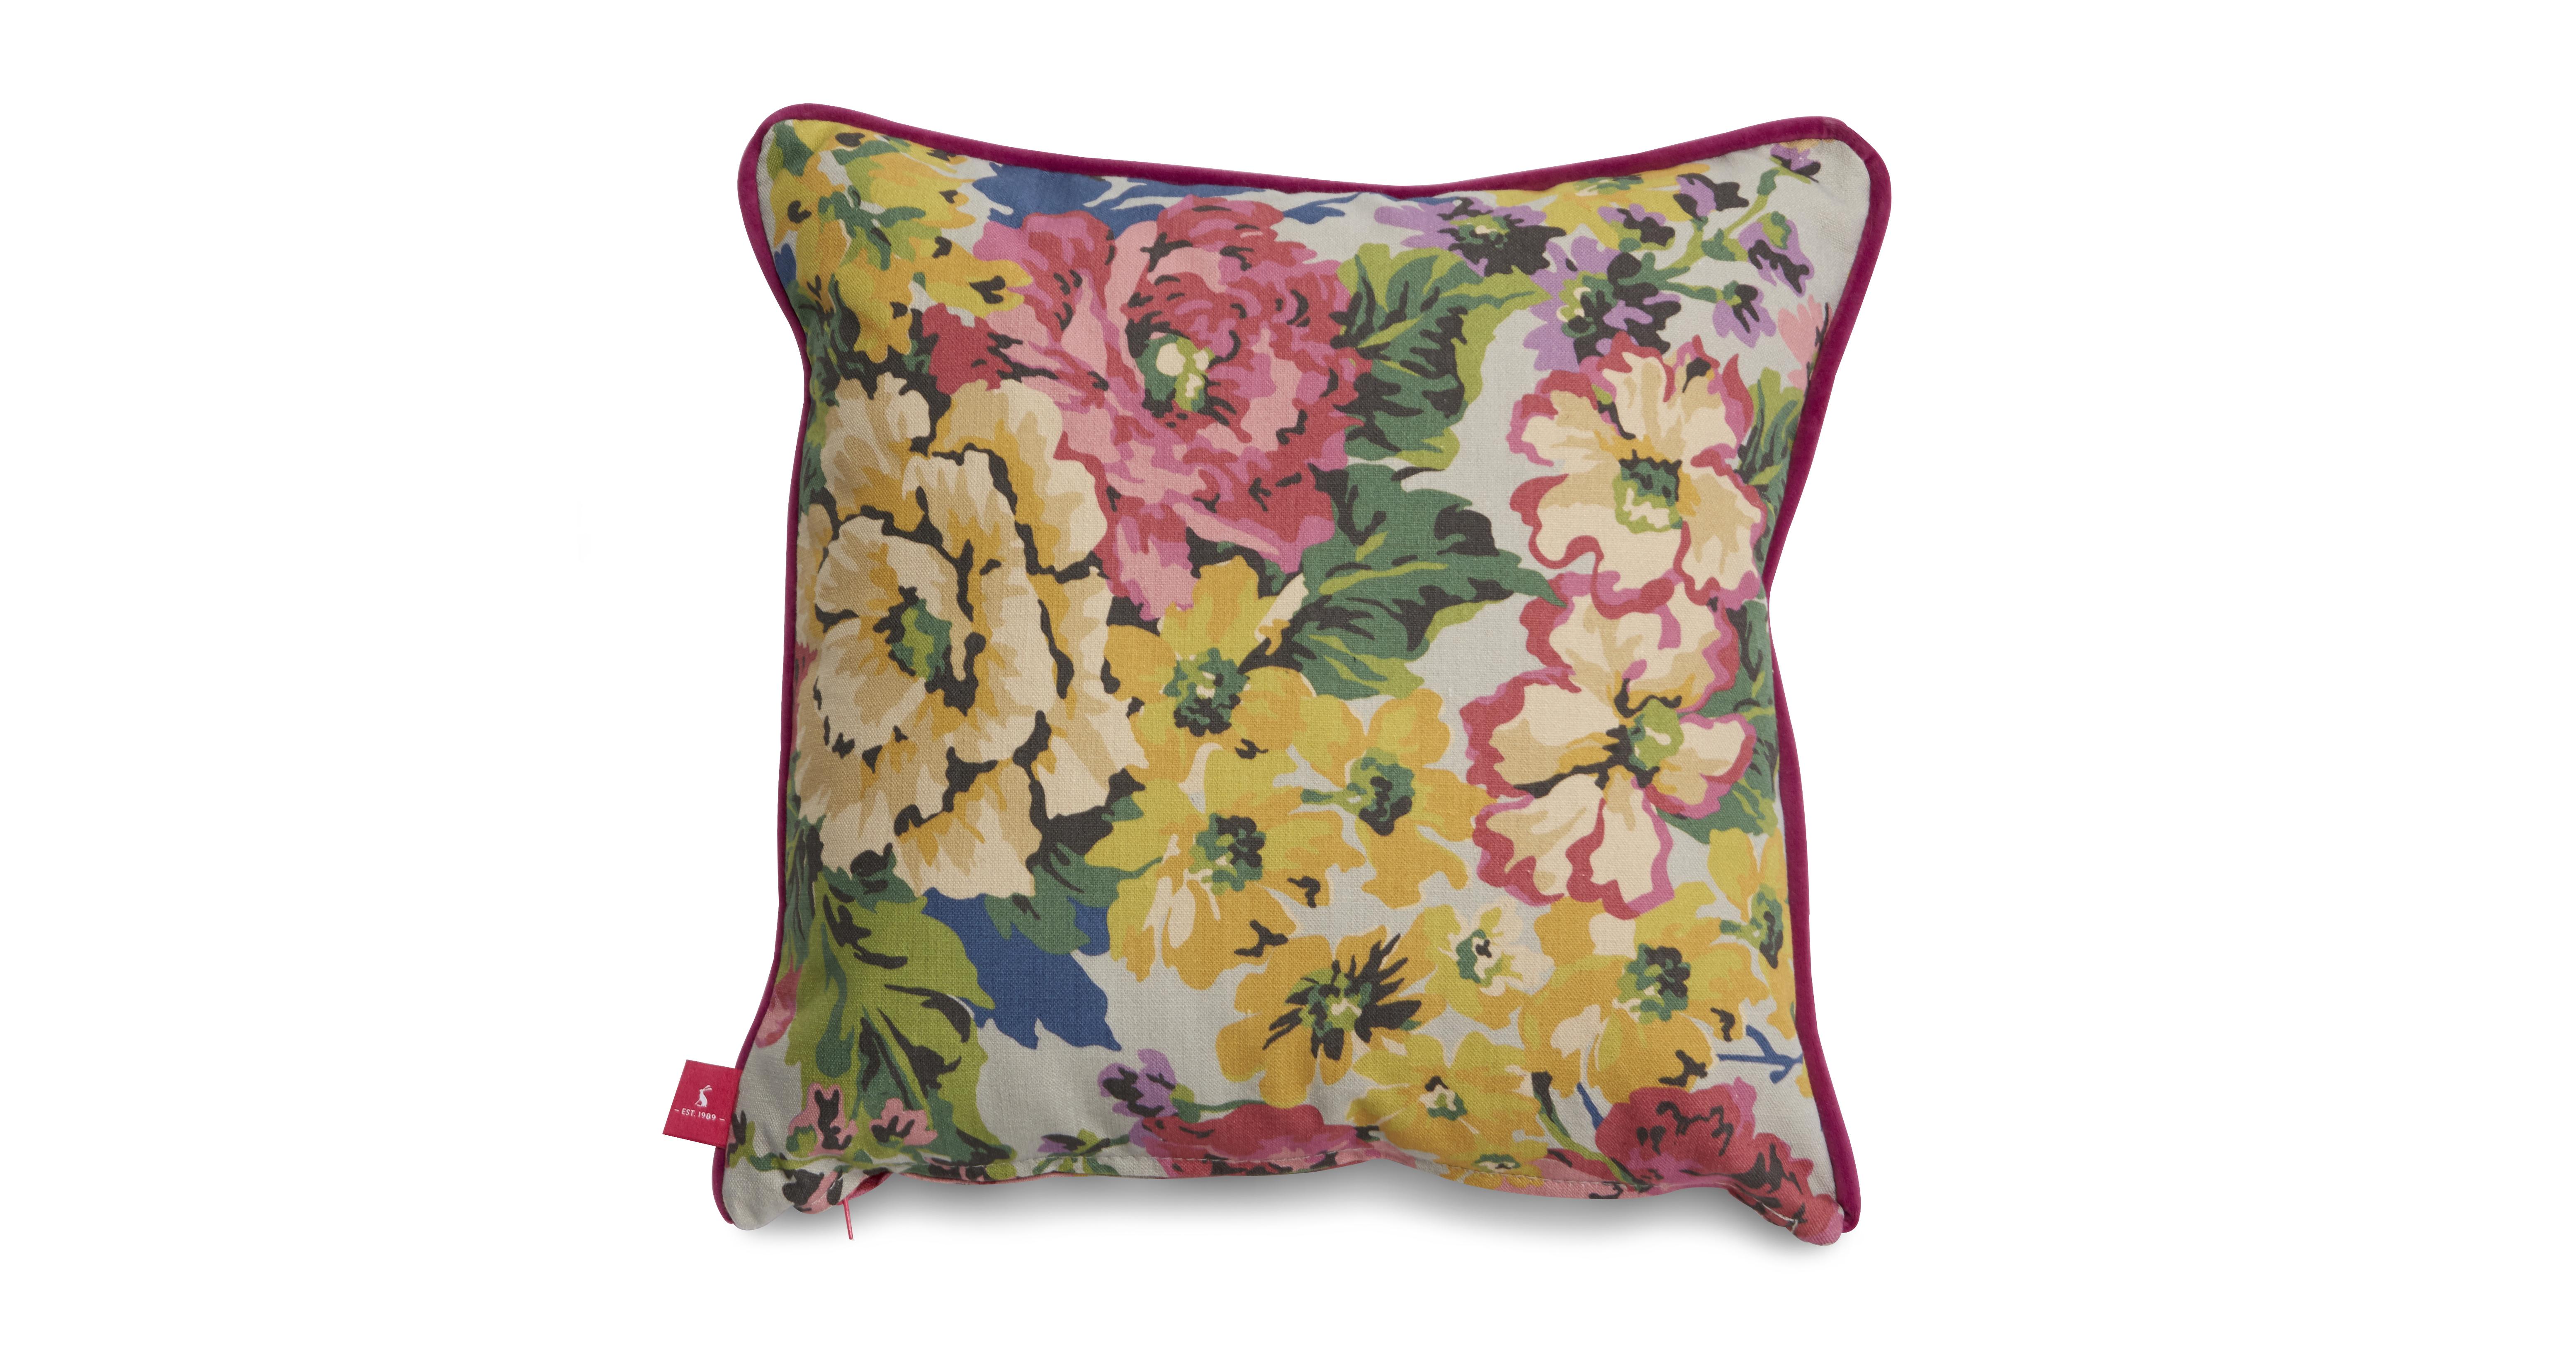 Joules Scatters Floral Cotton Small Scatter Cushion | DFS